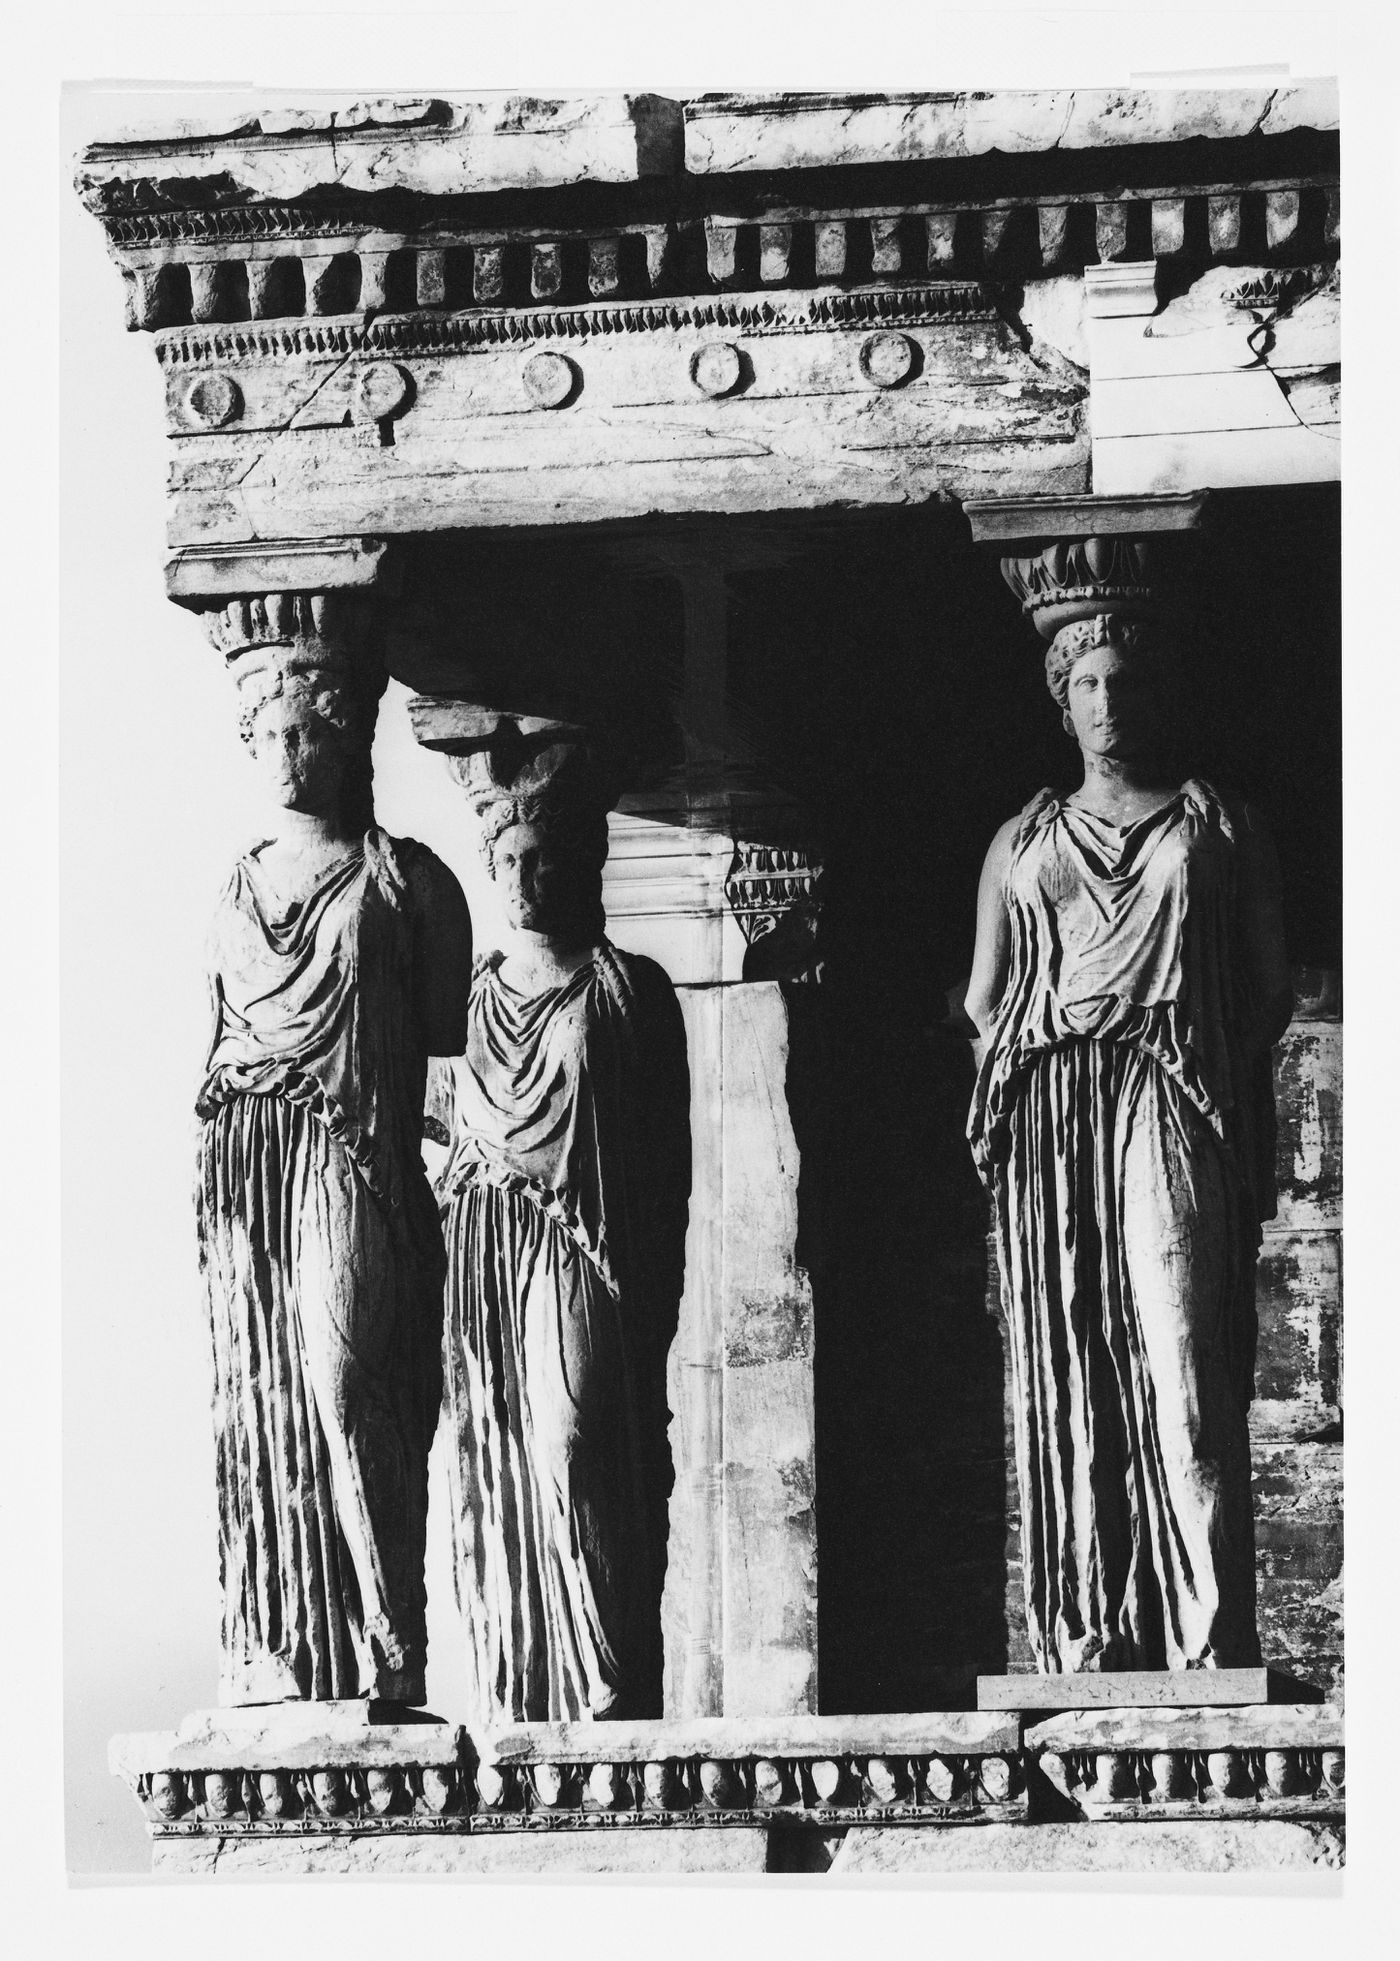 Erechtheion, close-up view of the porch of the Maidens, Caryatids, Acropolis, Athens, Greece